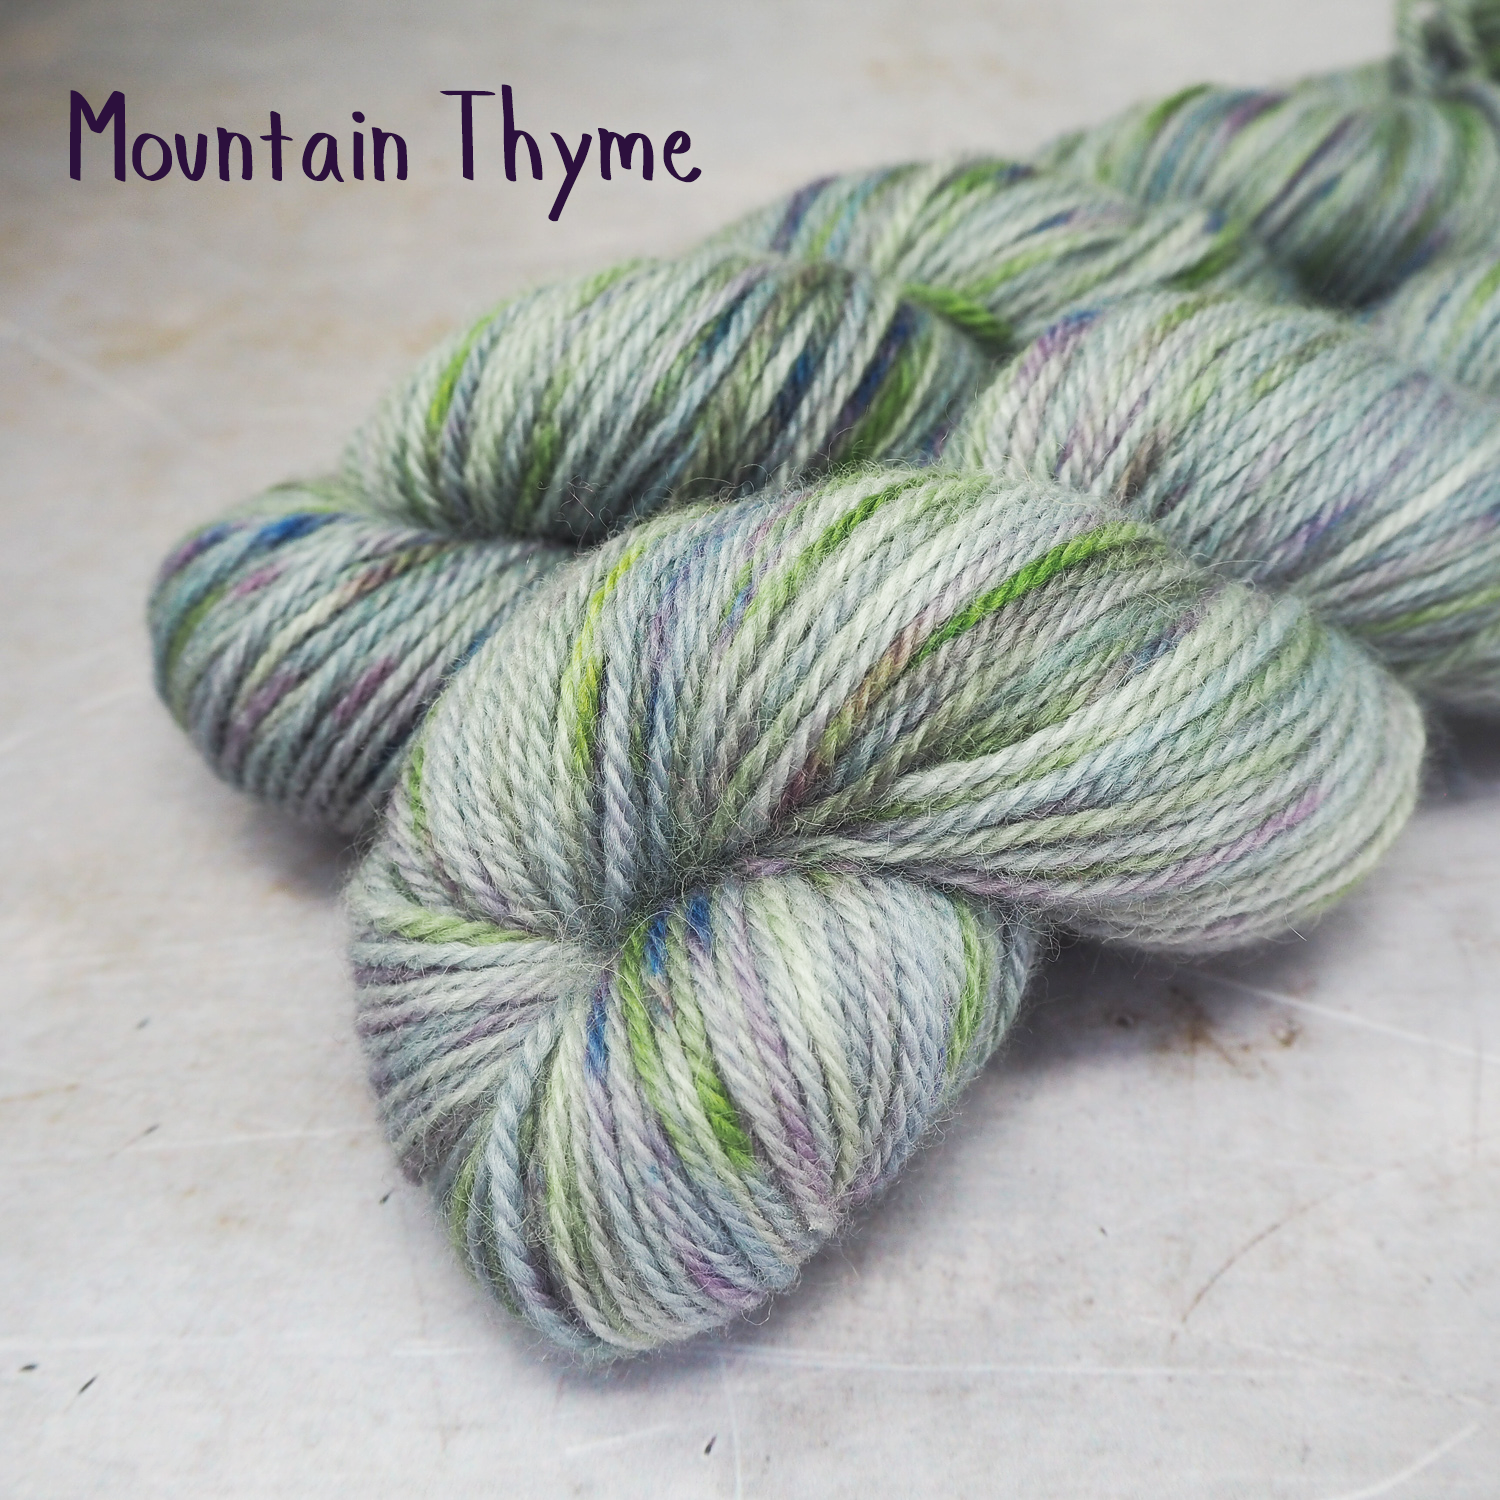 Two skeins of soft, DK-weight yarn, hand-dyed a a soft grey, and spekled with lime greed and violet. 